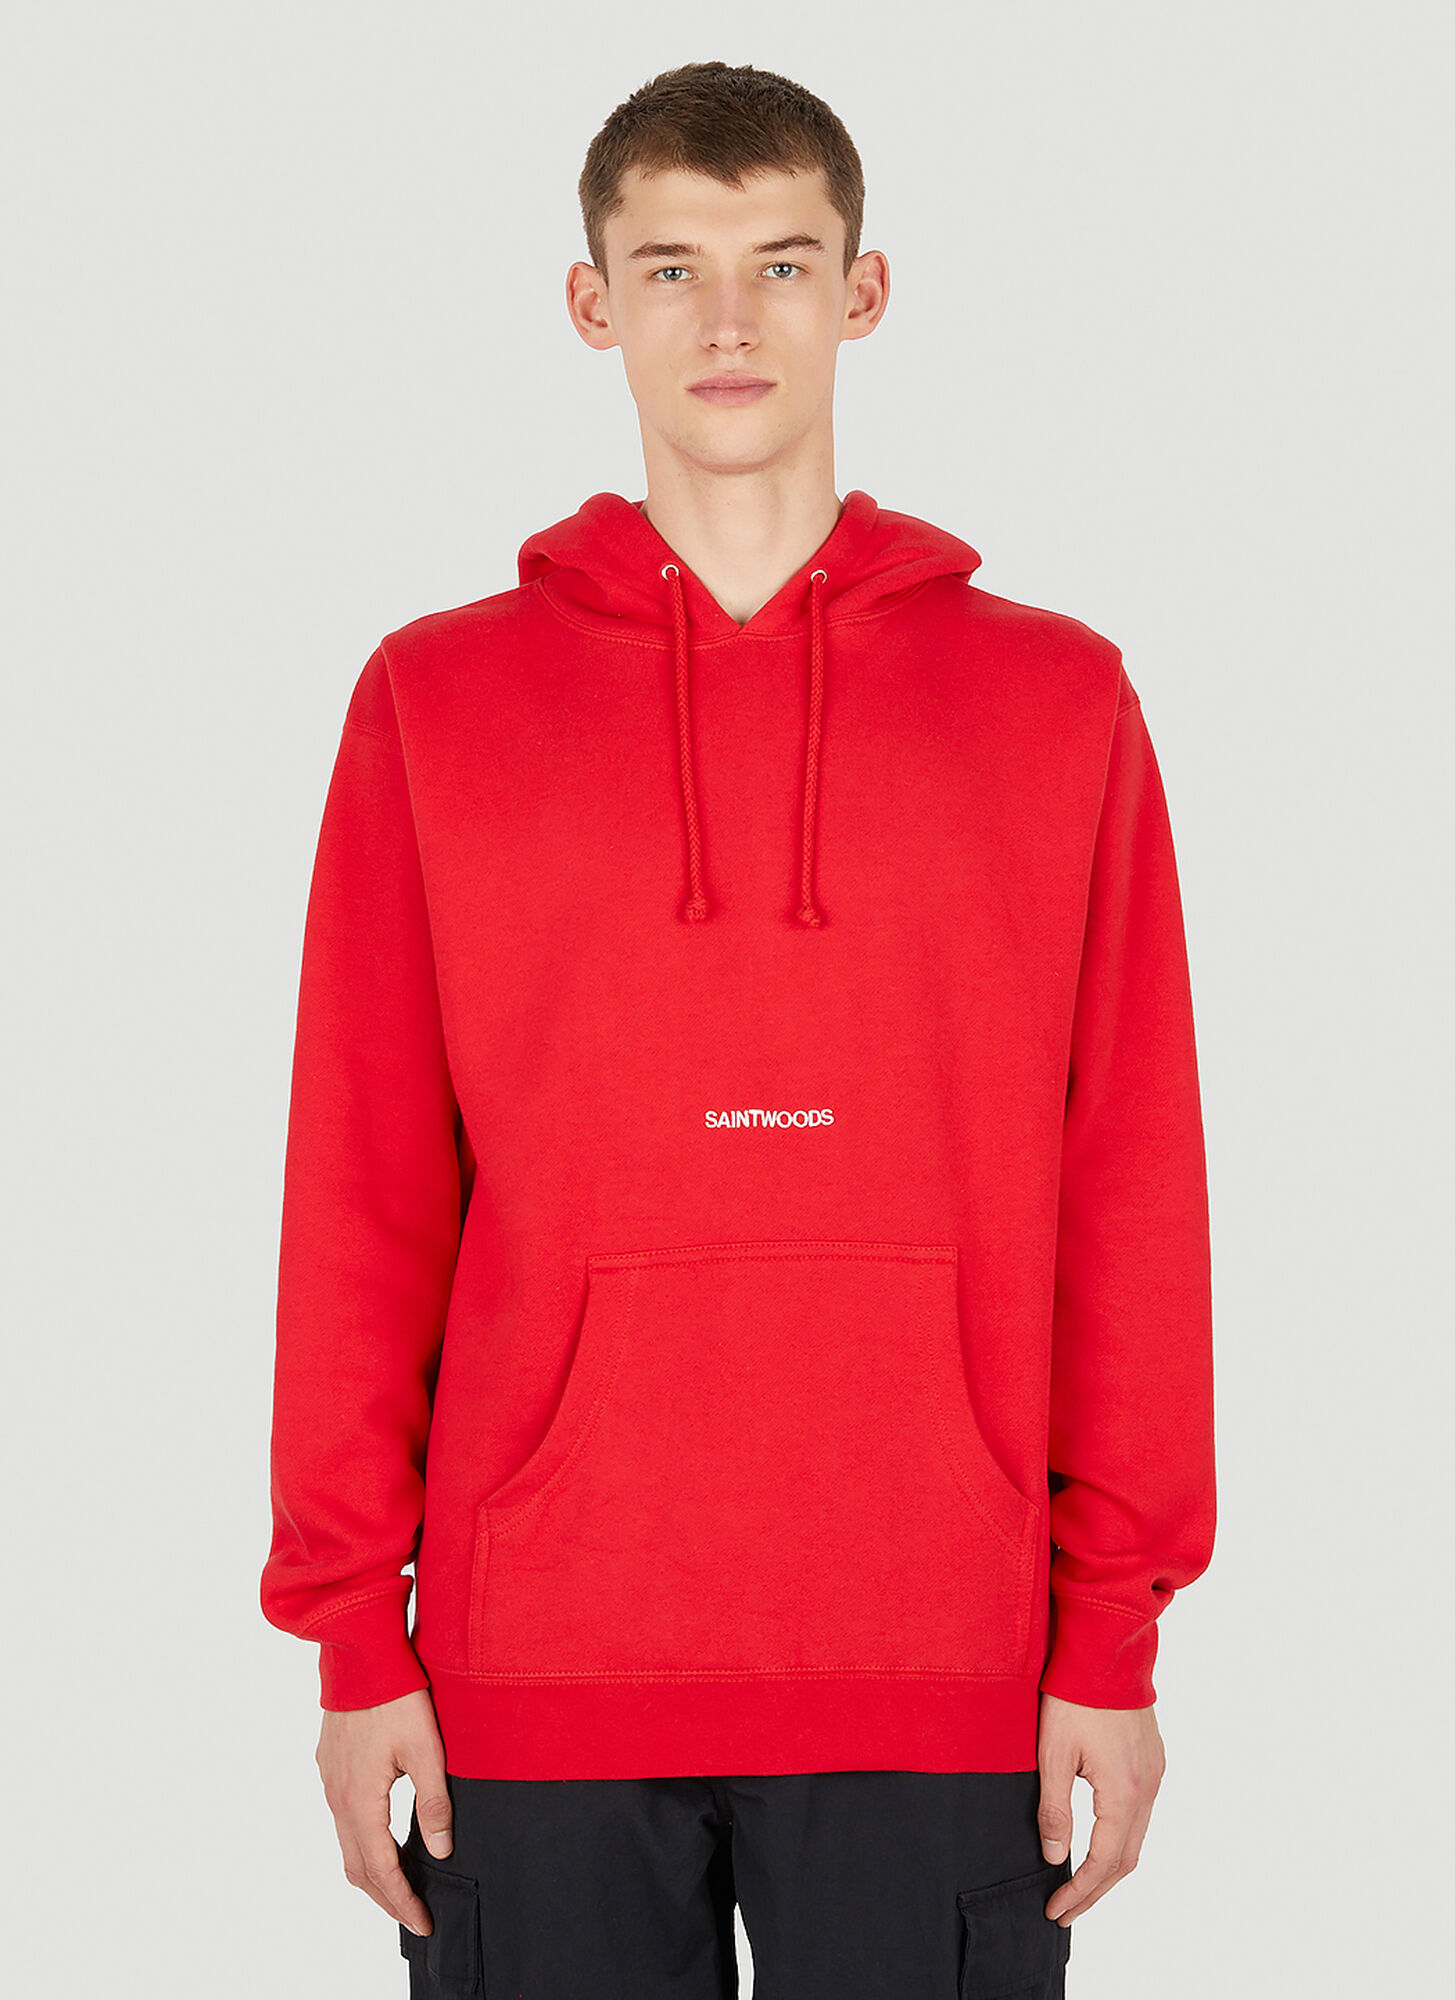 Saintwoods Logo Embroidery Hooded Sweatshirt Male Red